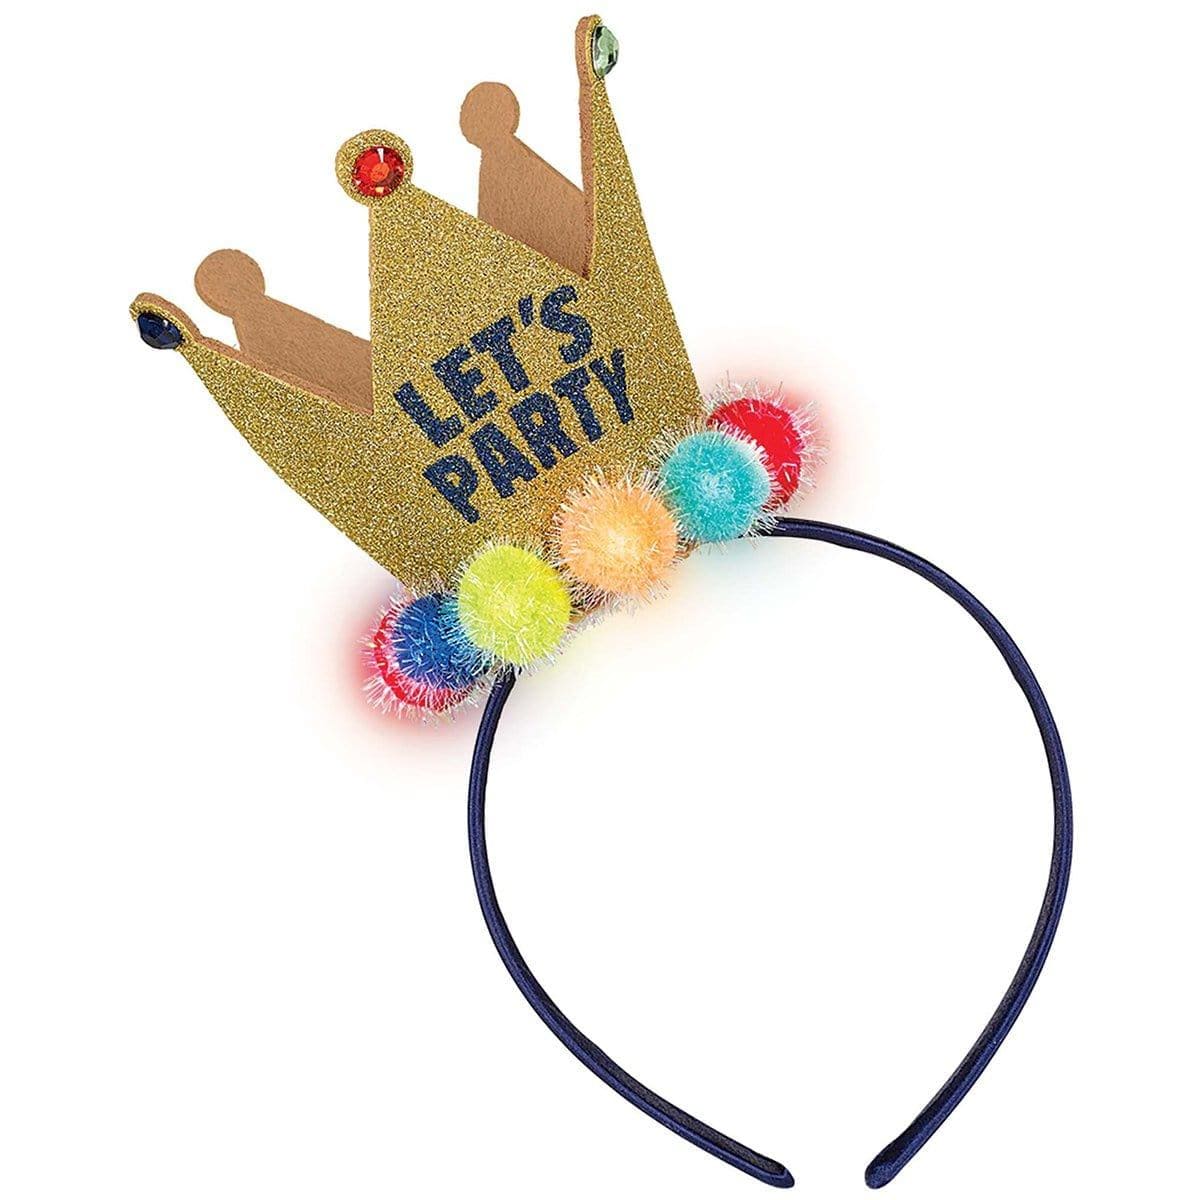 Buy General Birthday A Reason To Celebrate - Light-Up Crown sold at Party Expert